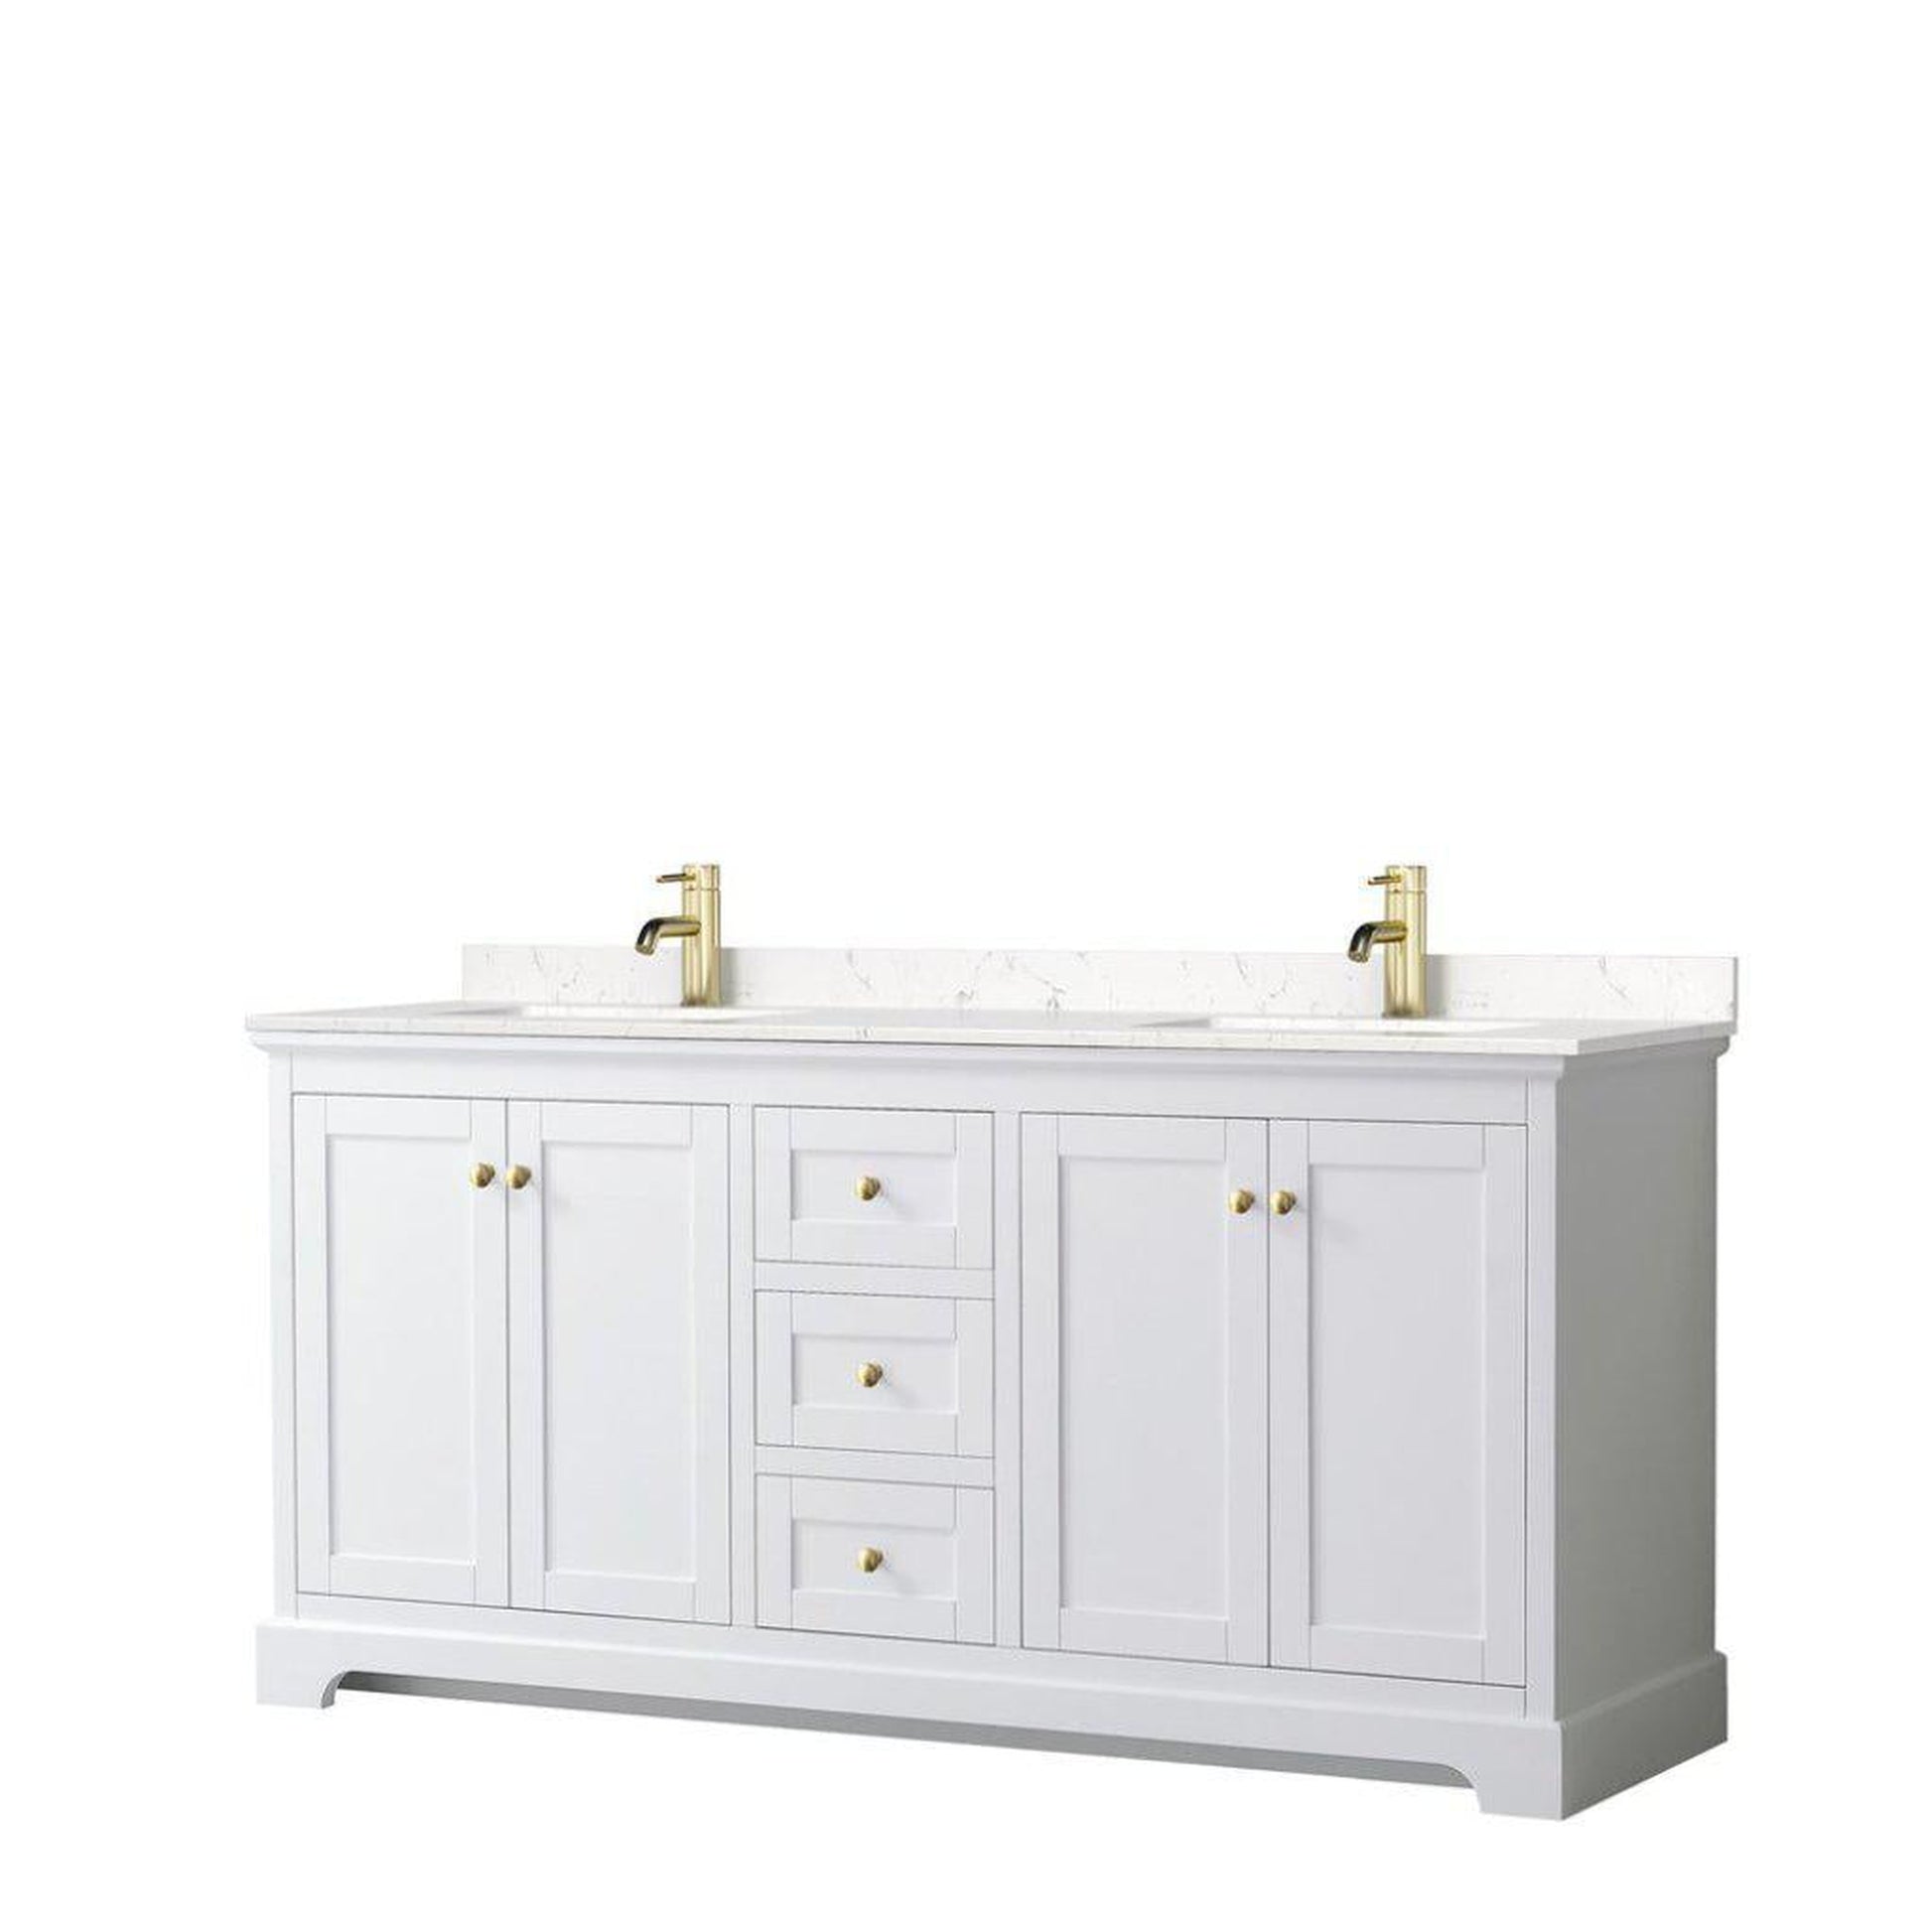 Wyndham Collection Avery 72" White Double Bathroom Vanity, Light-Vein Carrara Cultured Marble Countertop With 1-Hole Faucet, Square Sink, Gold Trims